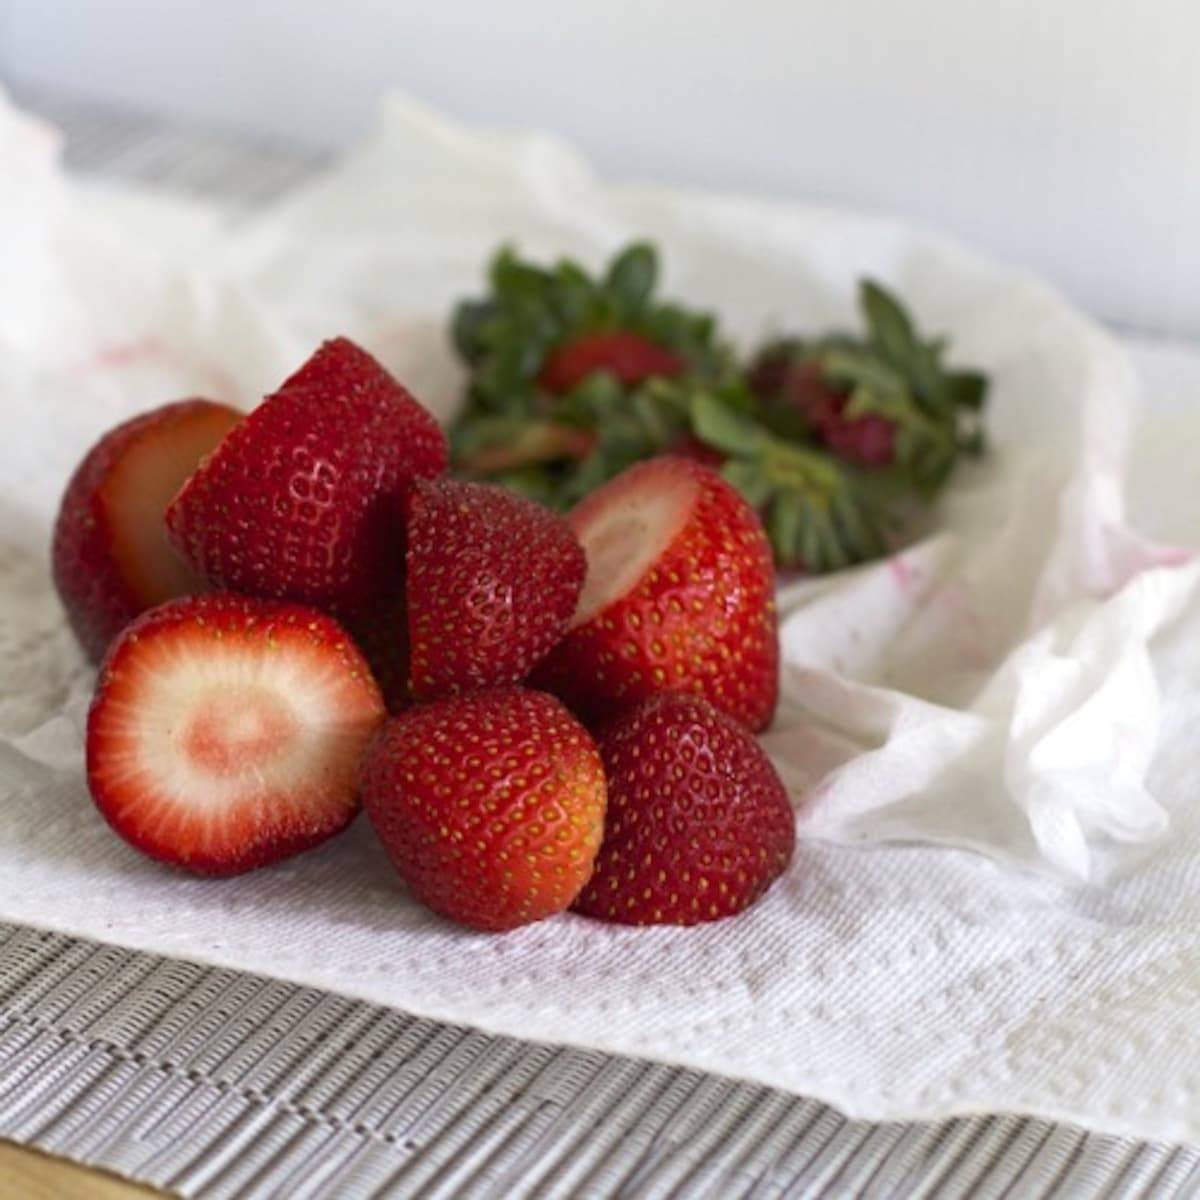 Strawberries on a piece of paper towel.